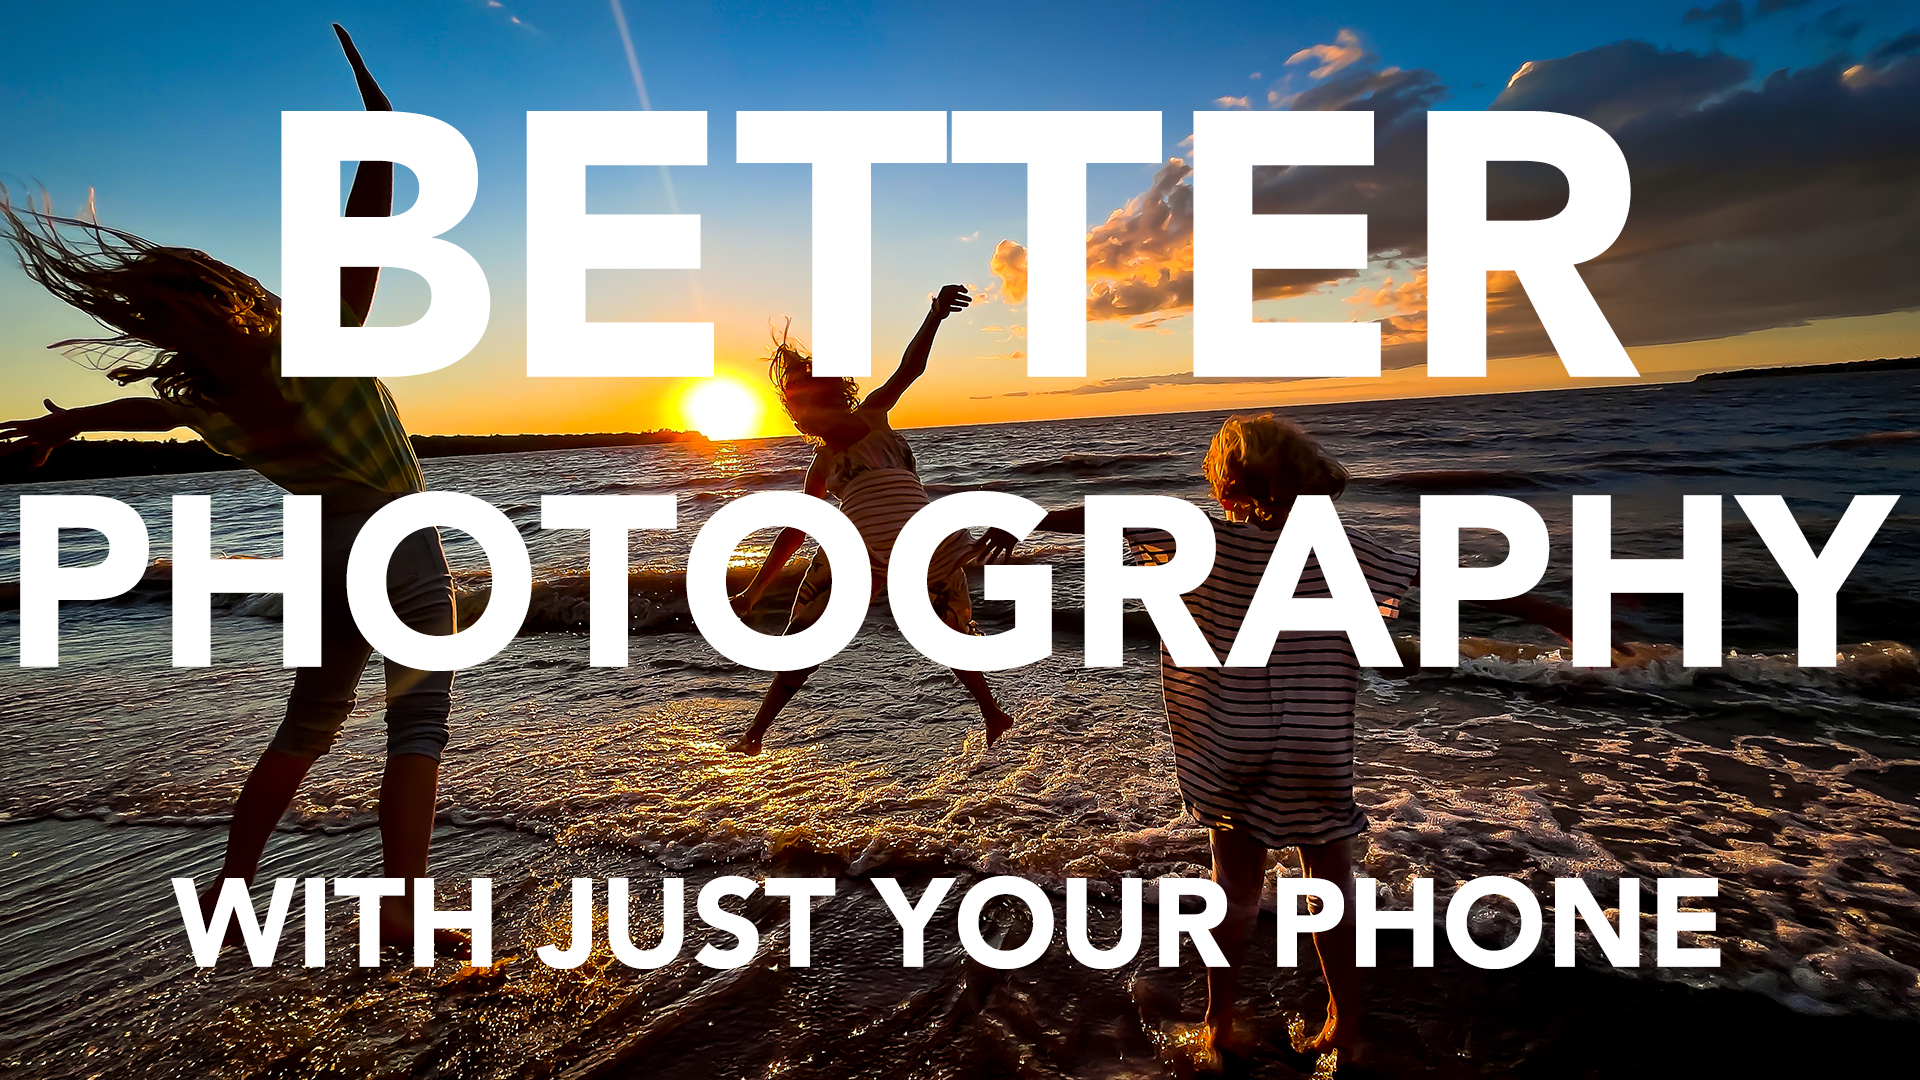 Learn how to take better photos with your iPhone camera in this online course. Perfect for content creators, digital marketing and social media content managers.